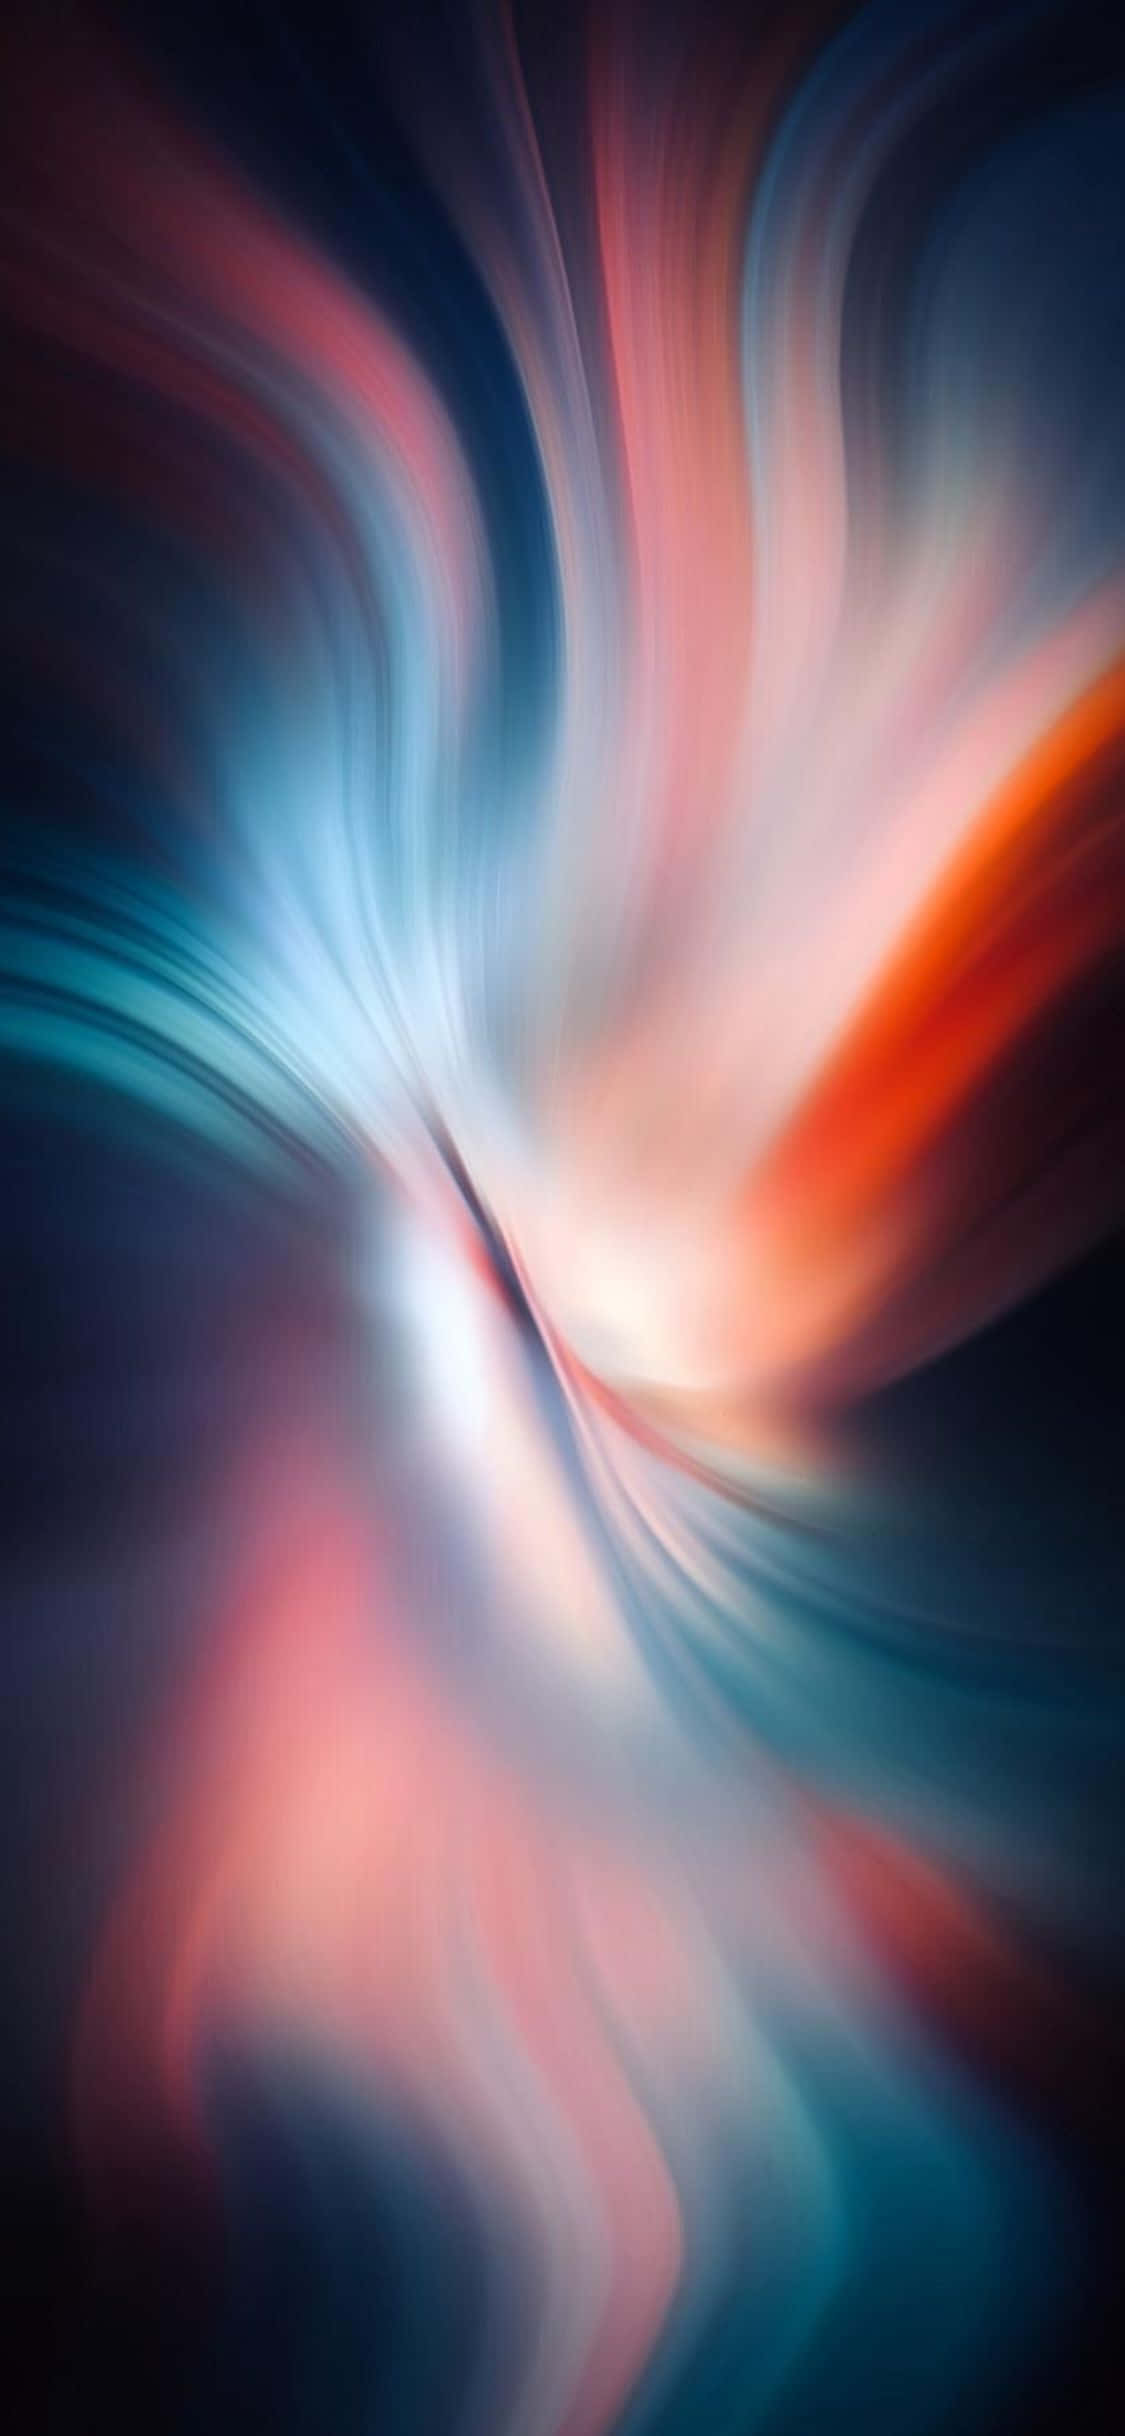 An Abstract Image Of A Colorful Swirling Background